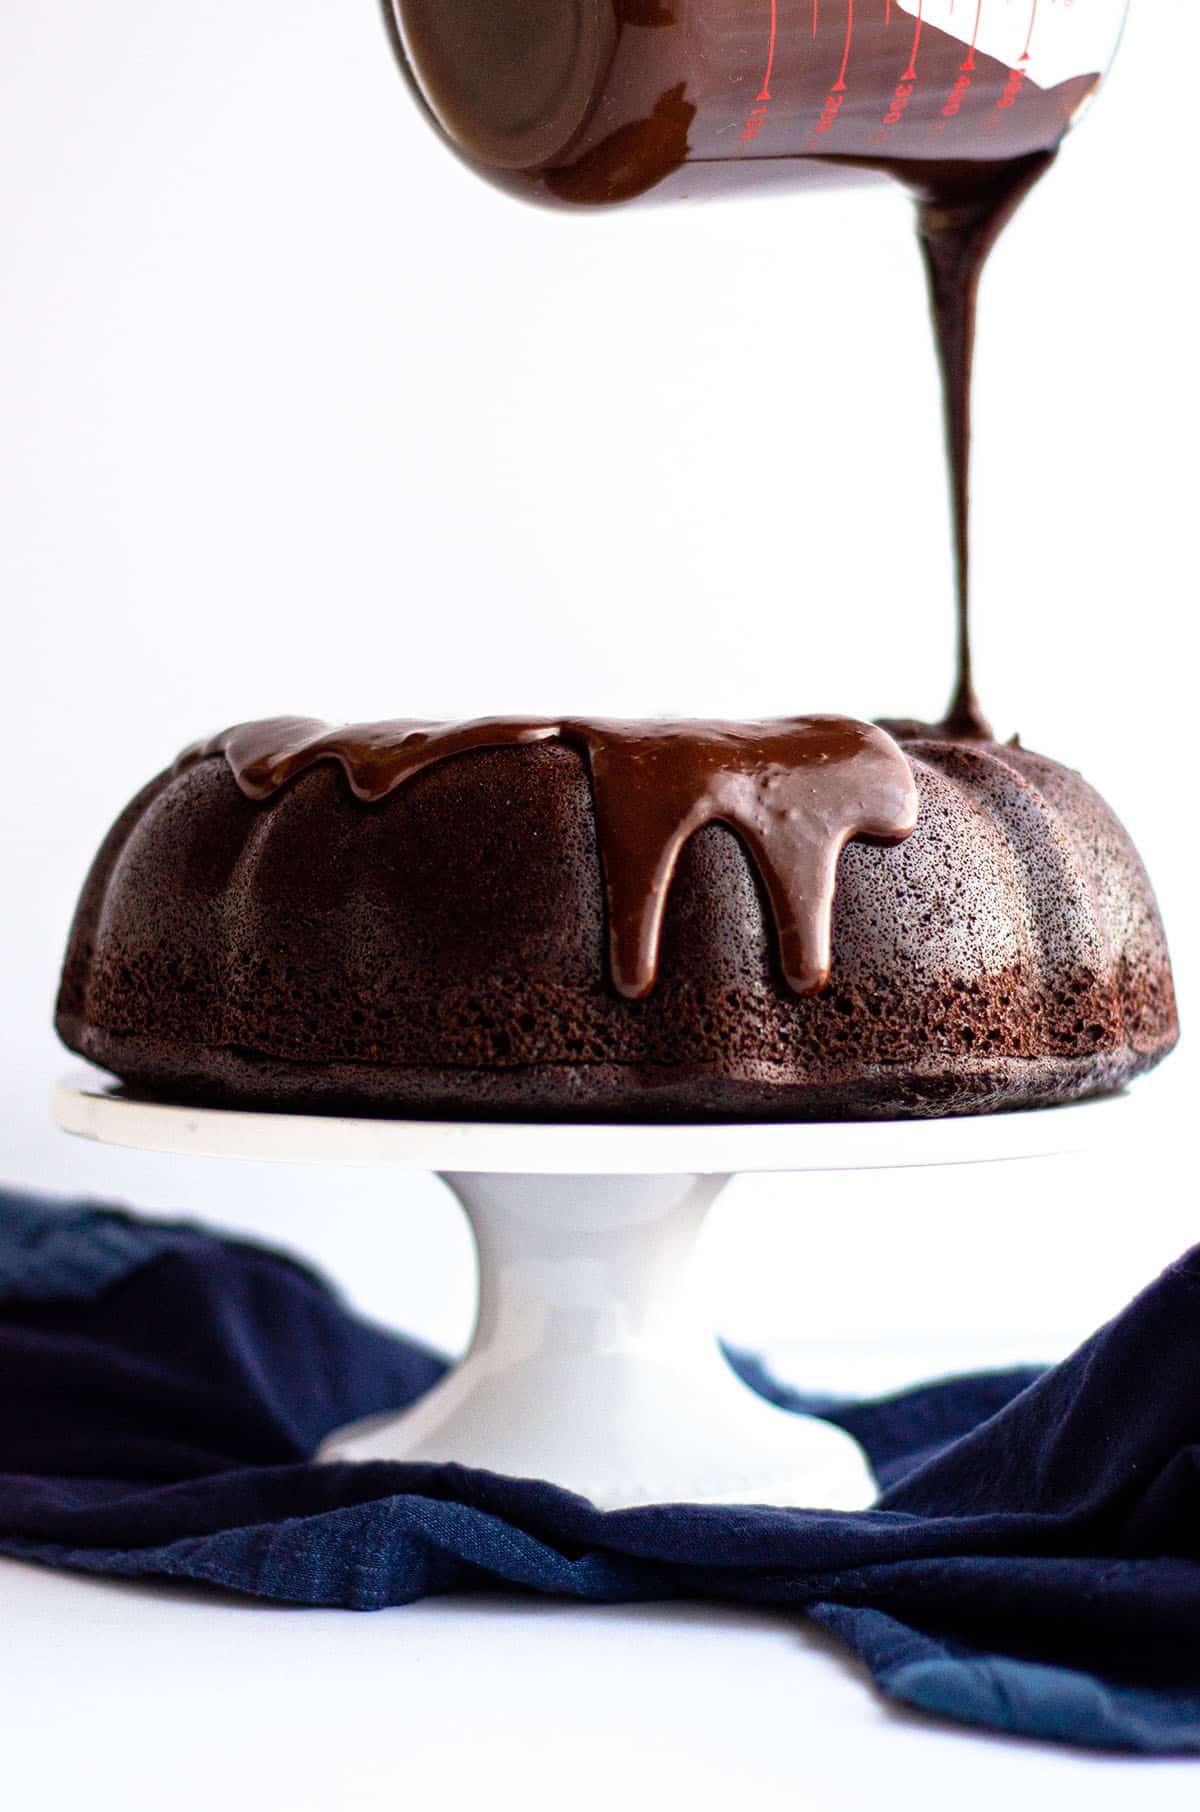 Chocolate Bundt Cake: A simple chocolate cake made with rich, deep flavors and topped with a smooth chocolate ganache.